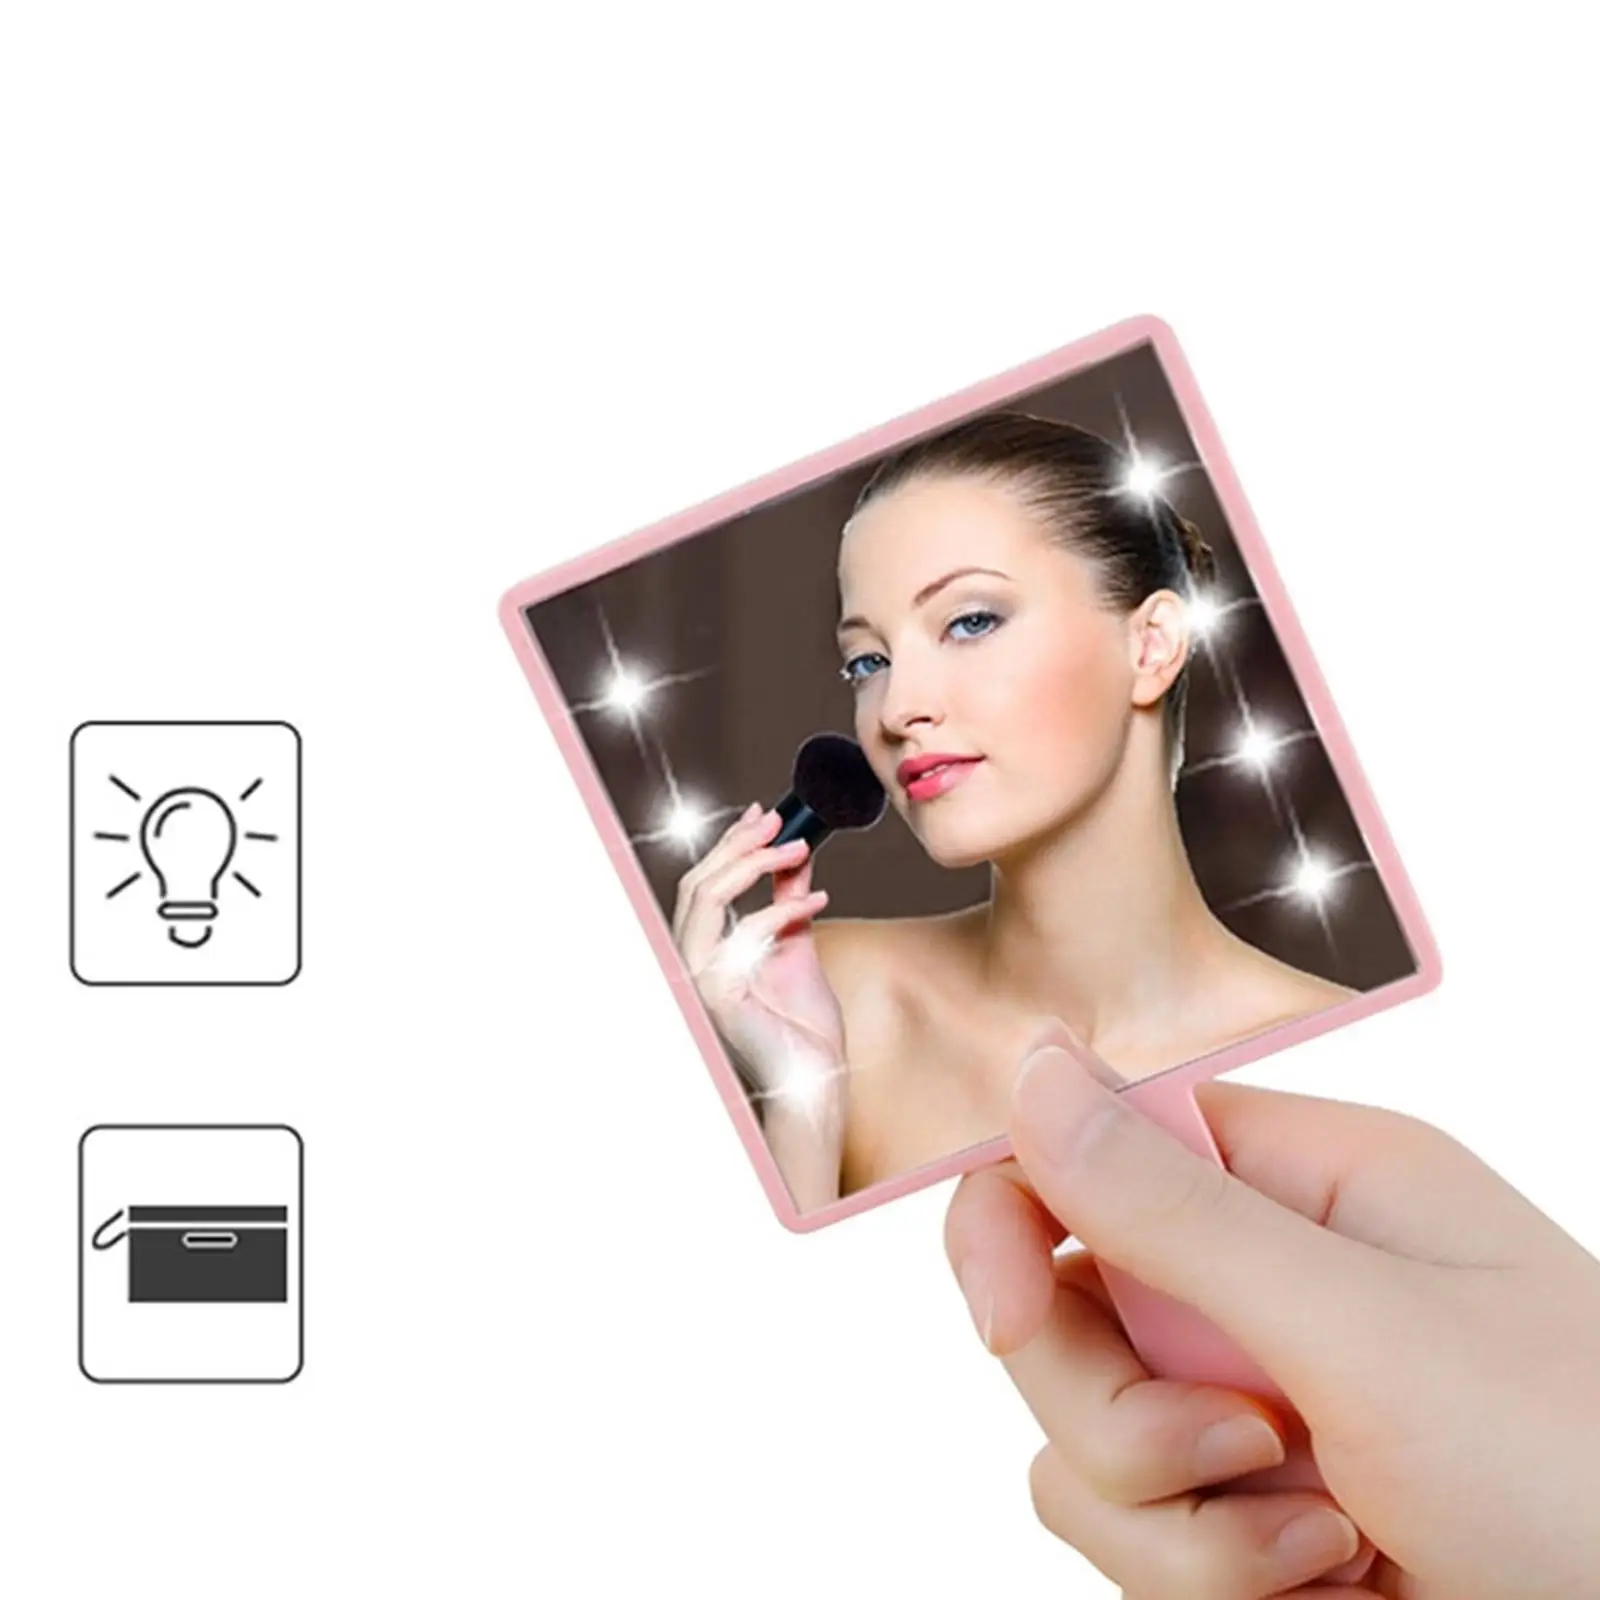 Makeup  Light, Gift for Woman, Vanity Mirror, Handheld Travel Makeup Mirror, Square Compact Portable, for Home